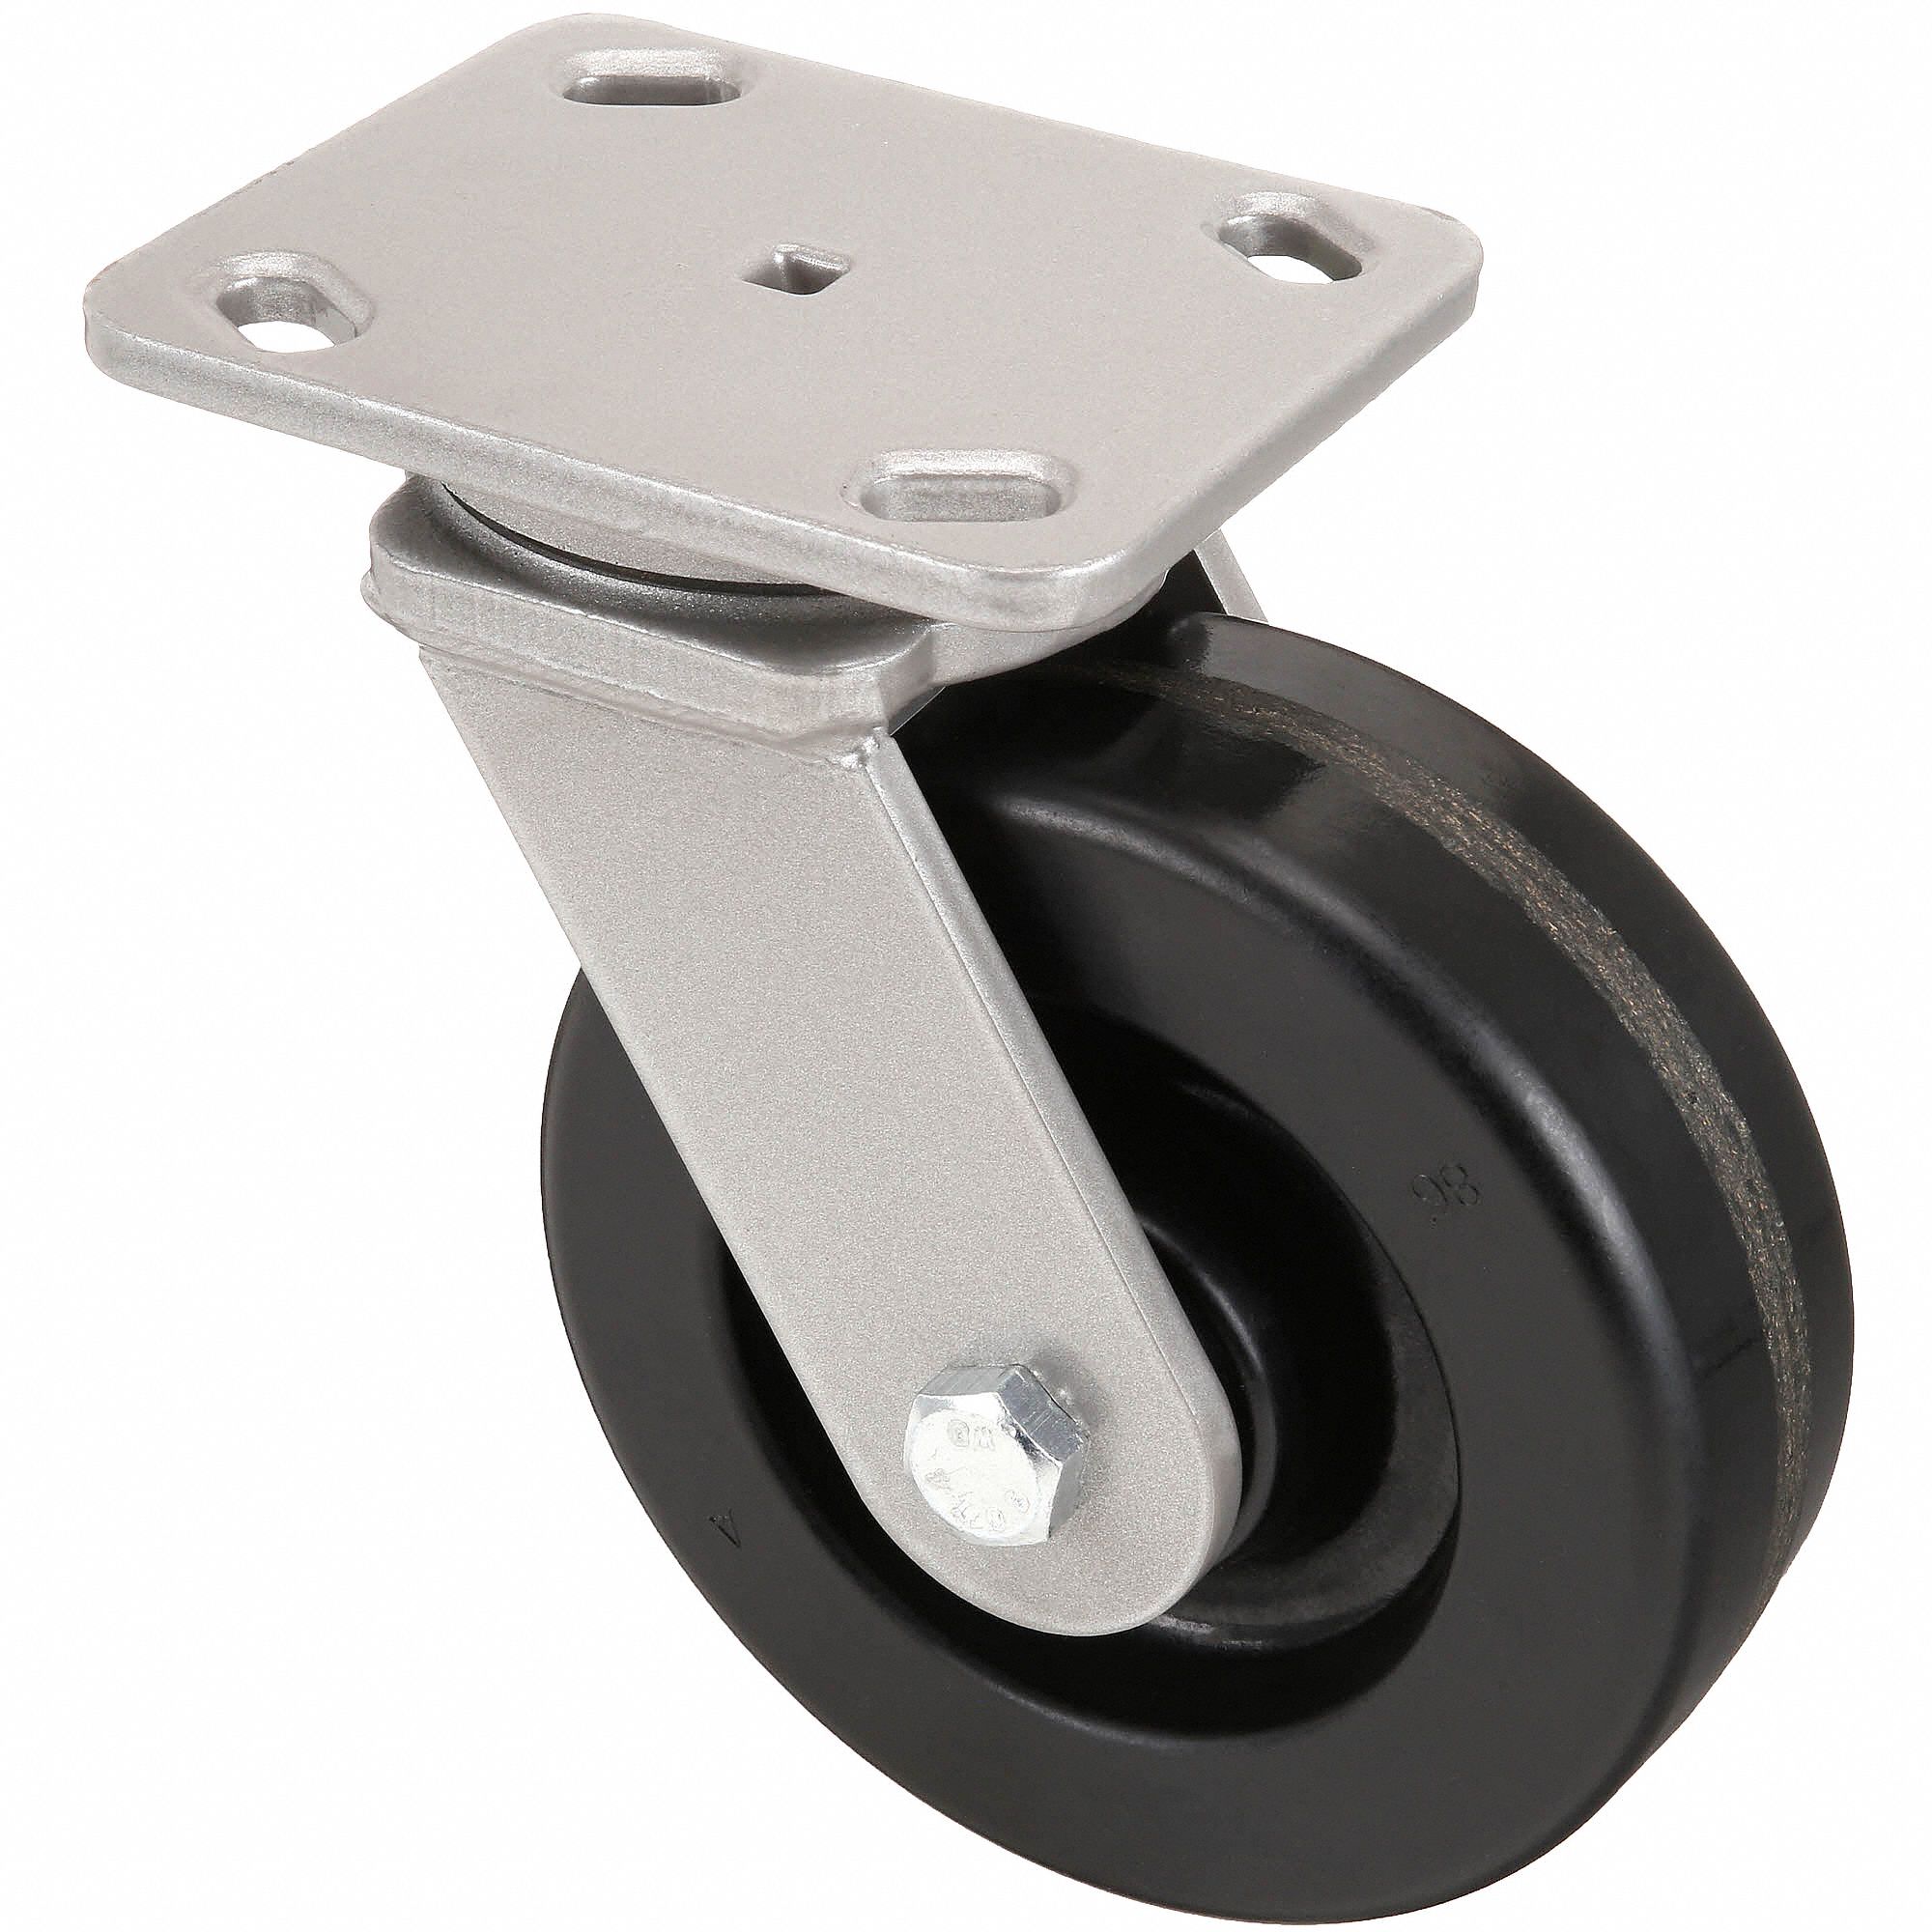 Directional Furniture Trolley Wheel Replacement Paytion Rigid Casters 4pcs Light Duty Wheels Rigid Caster 